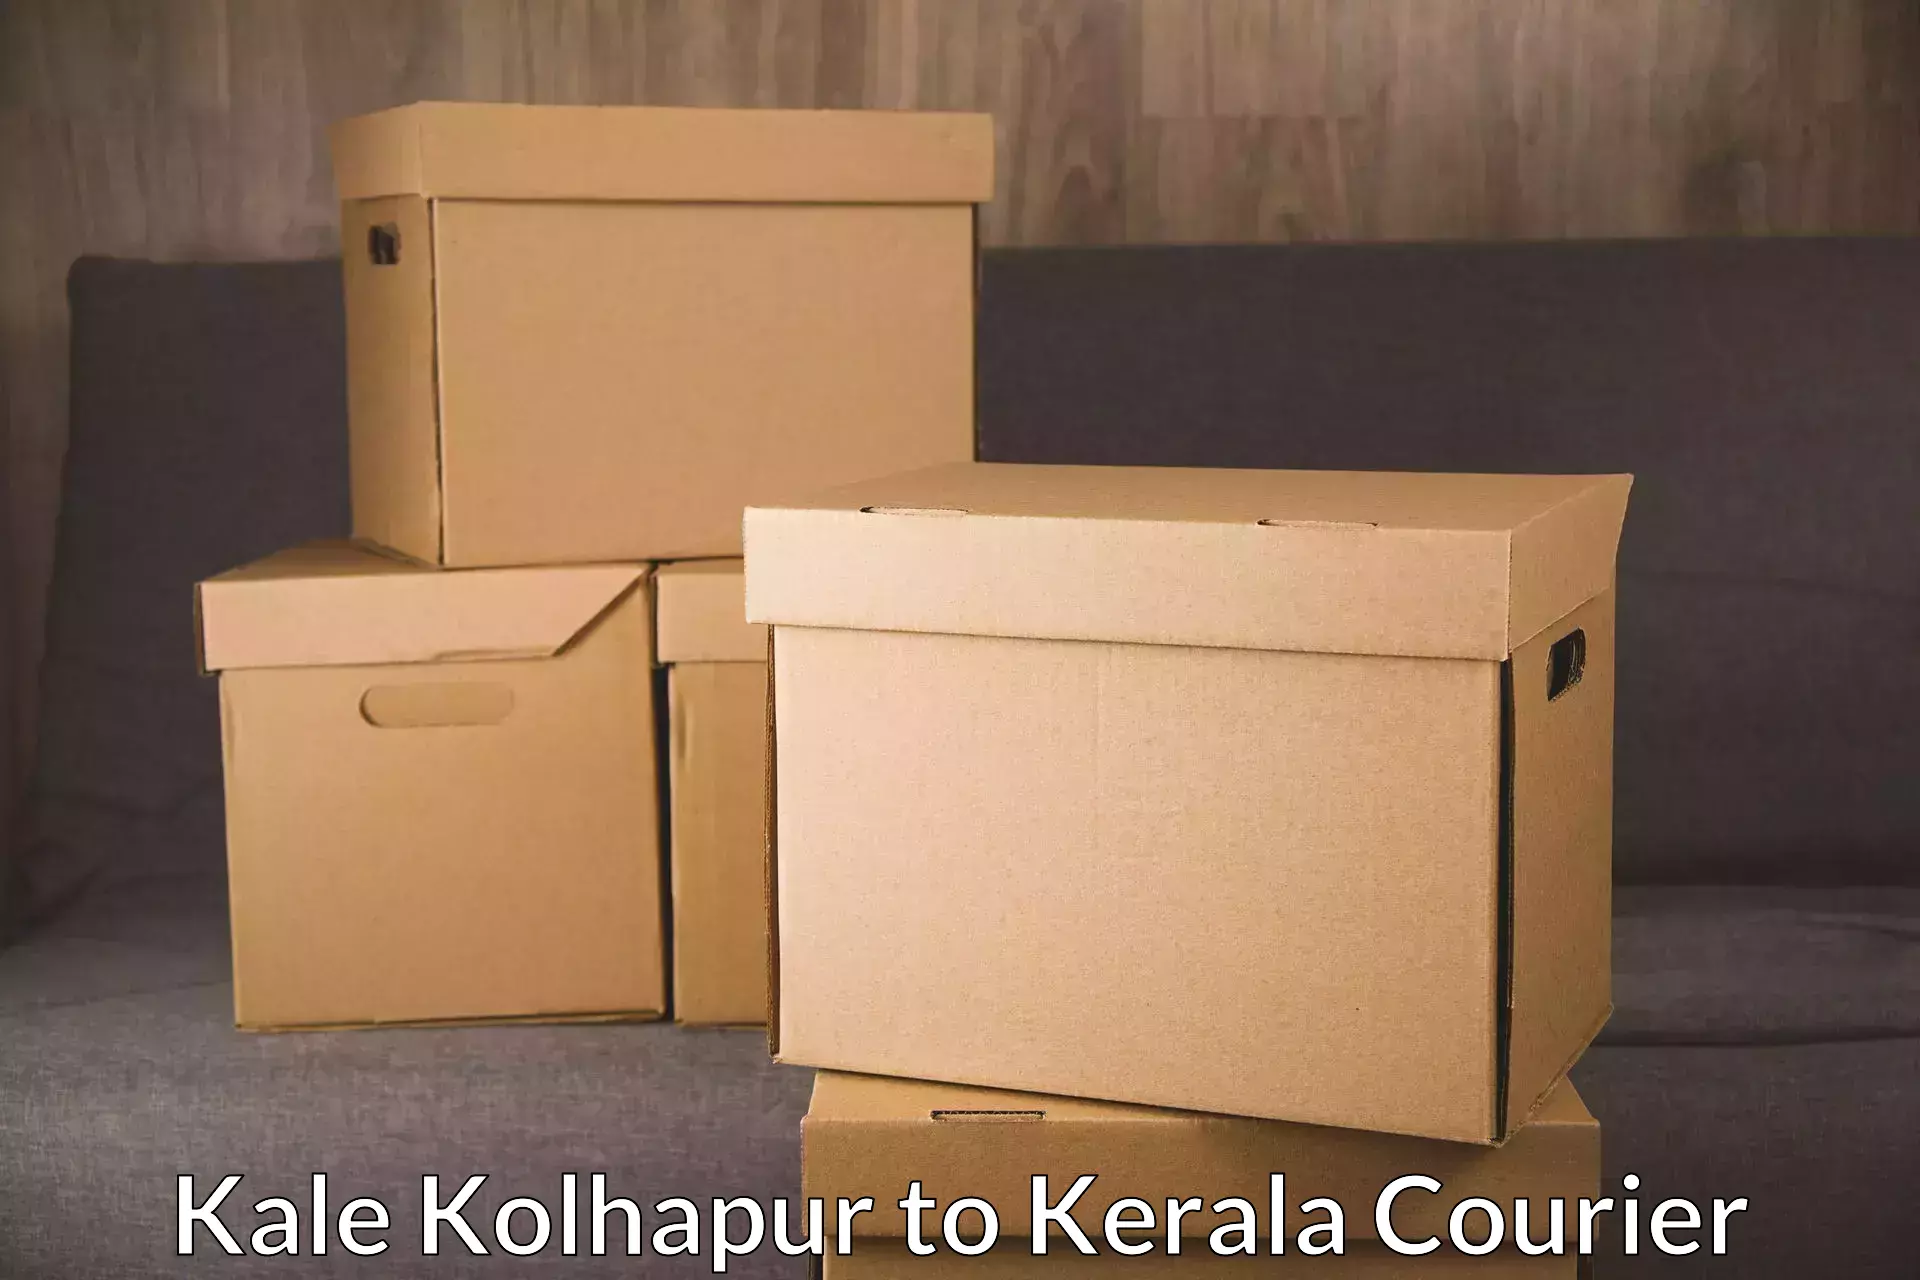 End-to-end delivery Kale Kolhapur to Kerala